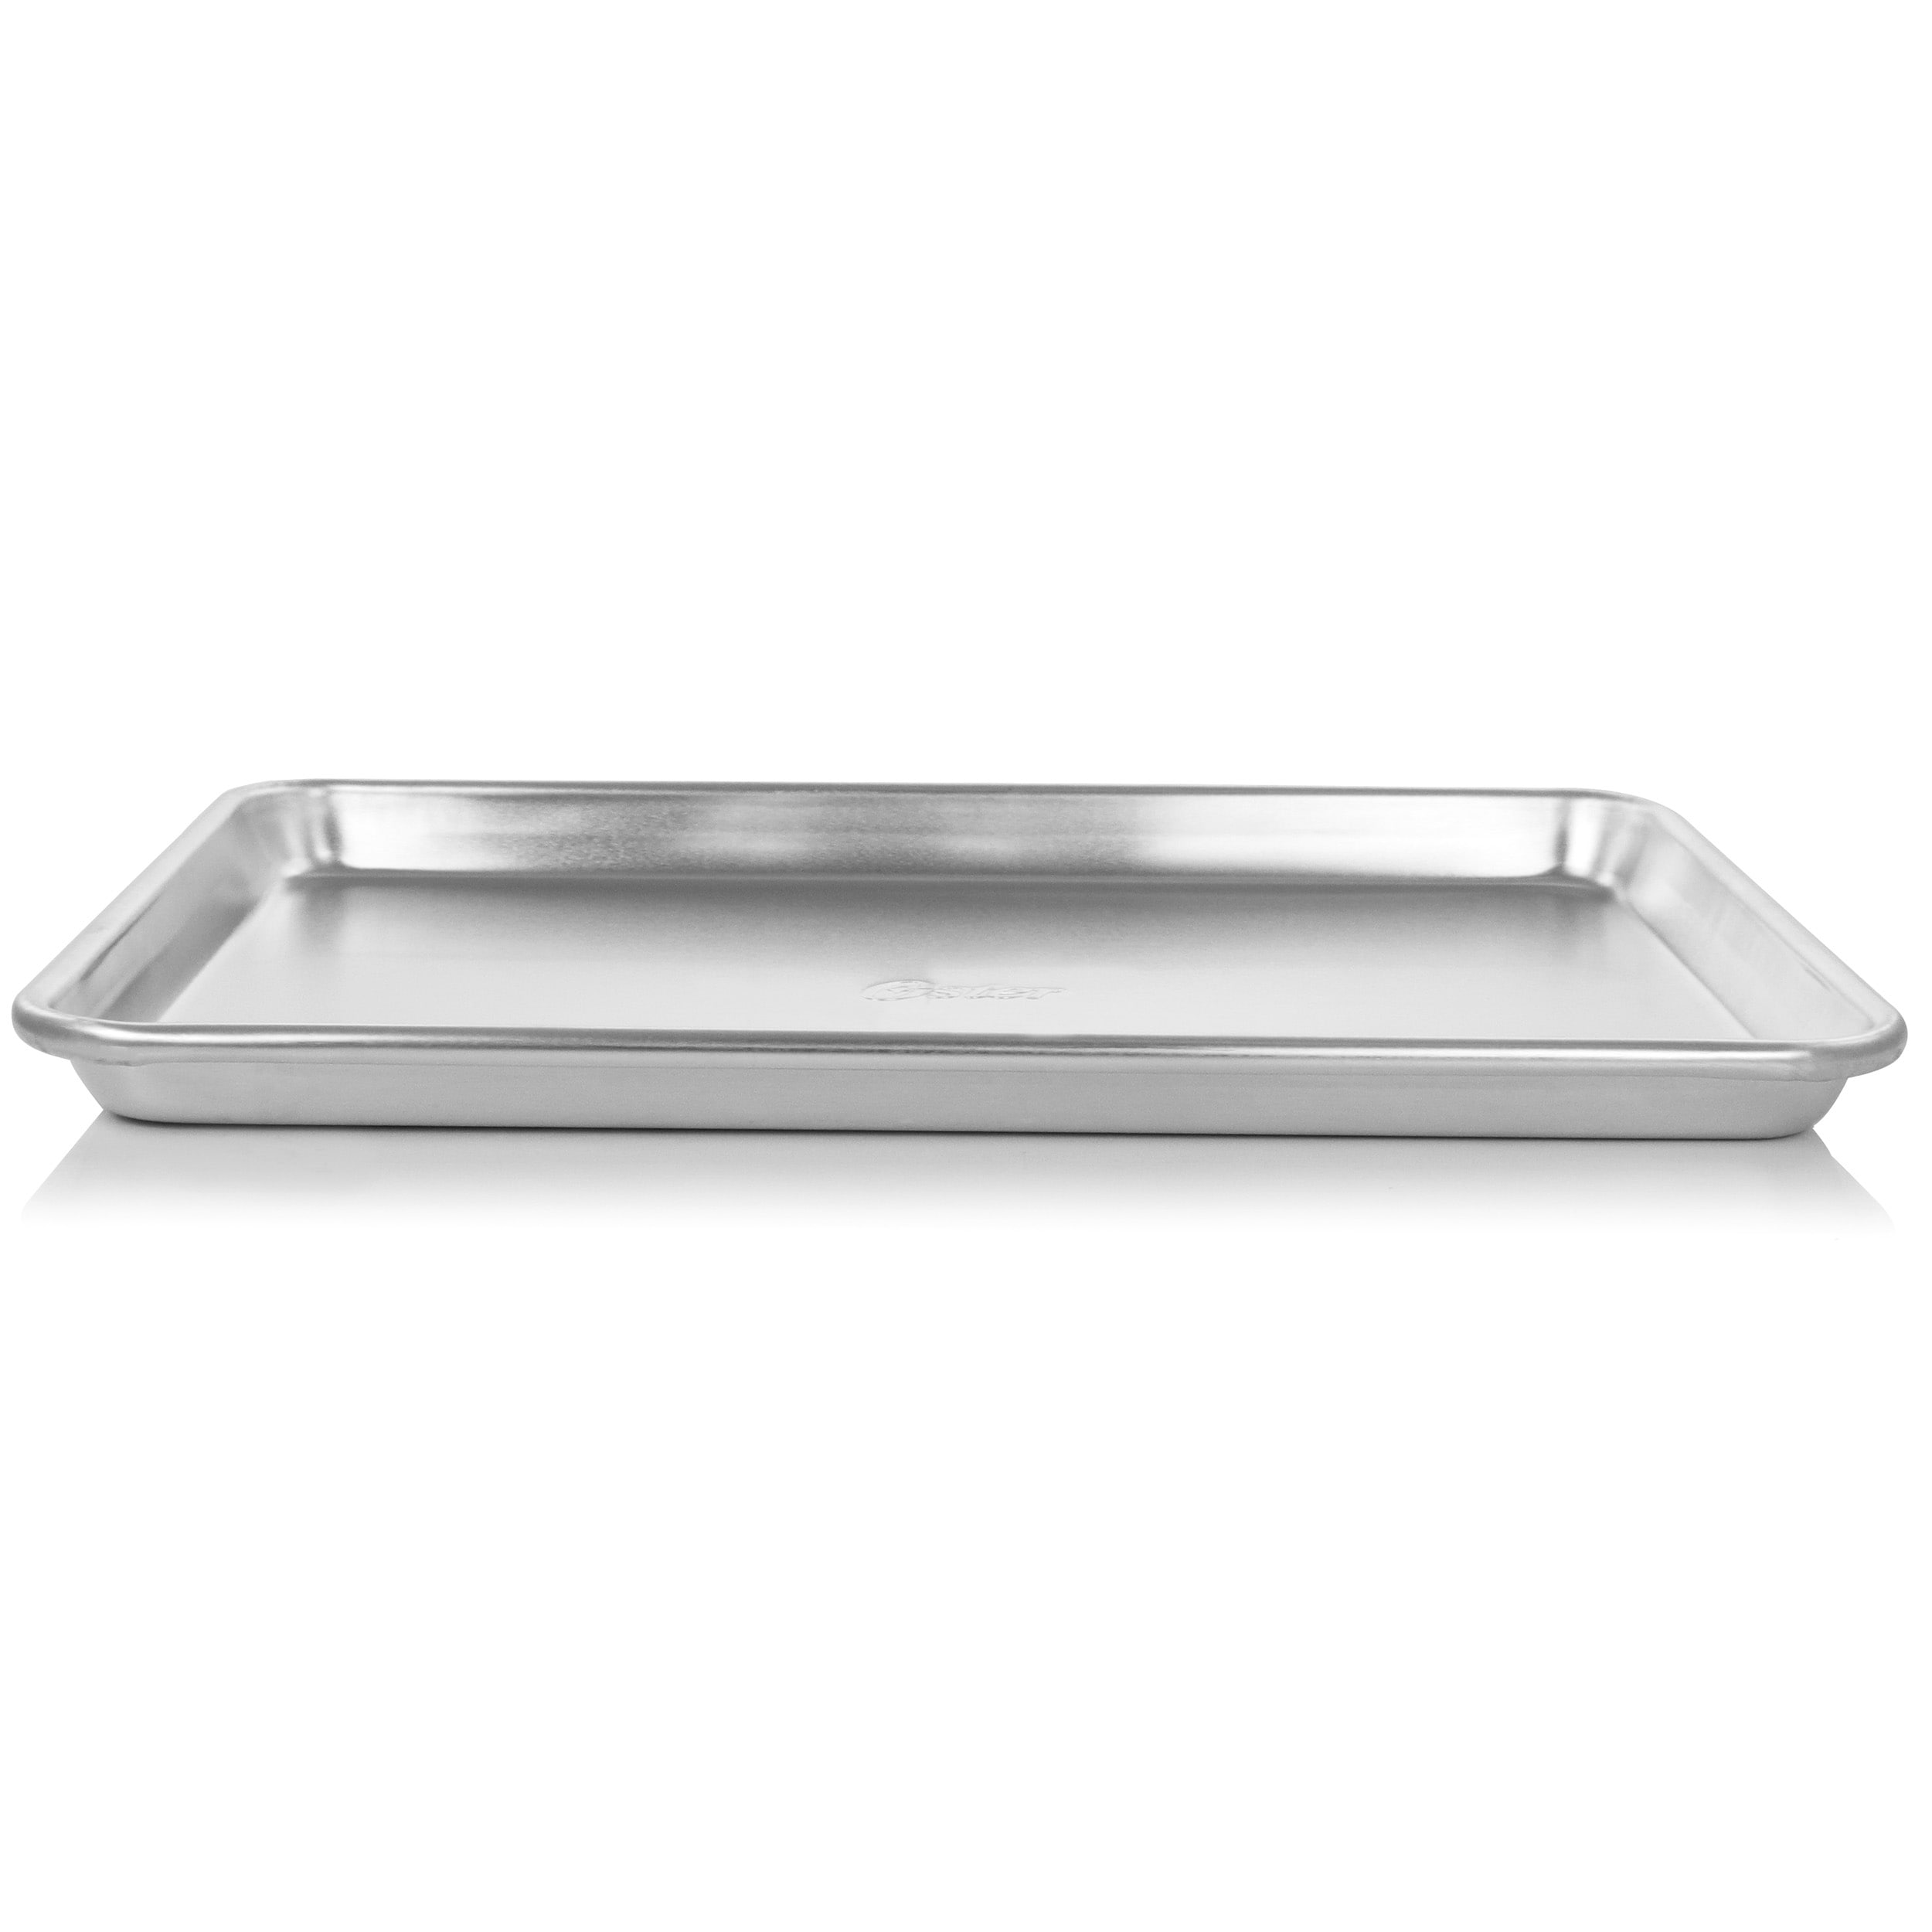 https://ak1.ostkcdn.com/images/products/is/images/direct/776d91a4af72377dfc4d8a16eb33f54432857da6/15-x-10.5-Inch-Aluminum-Jelly-Roll-Pan.jpg